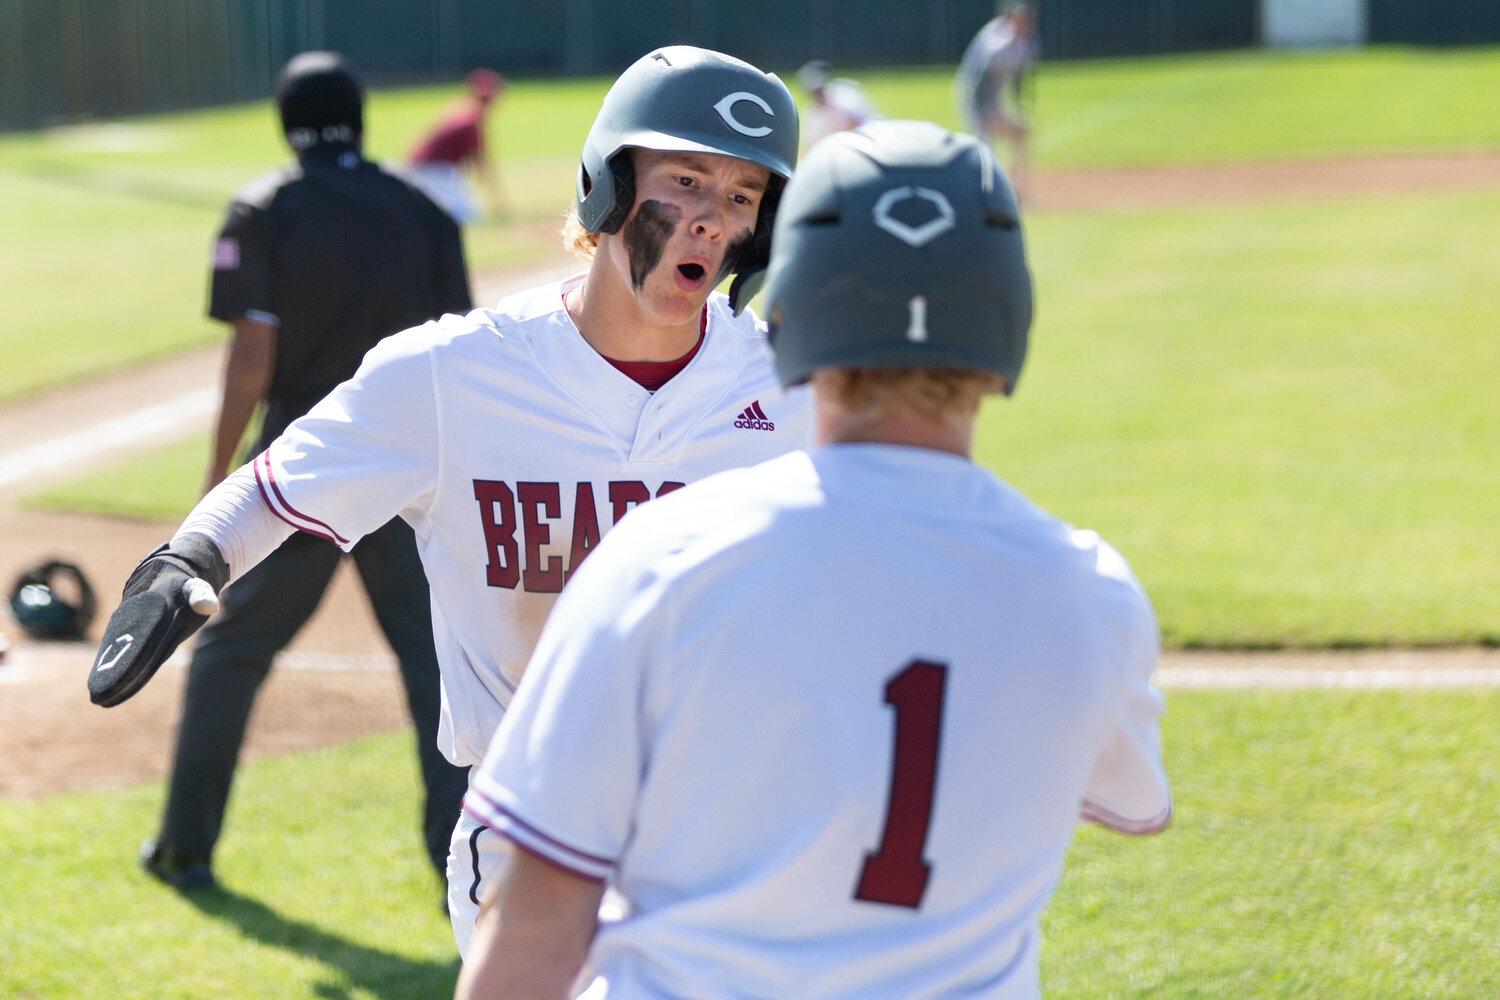 W.F. West's Deacon Meller high-fives teammate Ross Kelley (1) after scoring a run against Port Angeles in the opening round of state in Chehalis May 20.